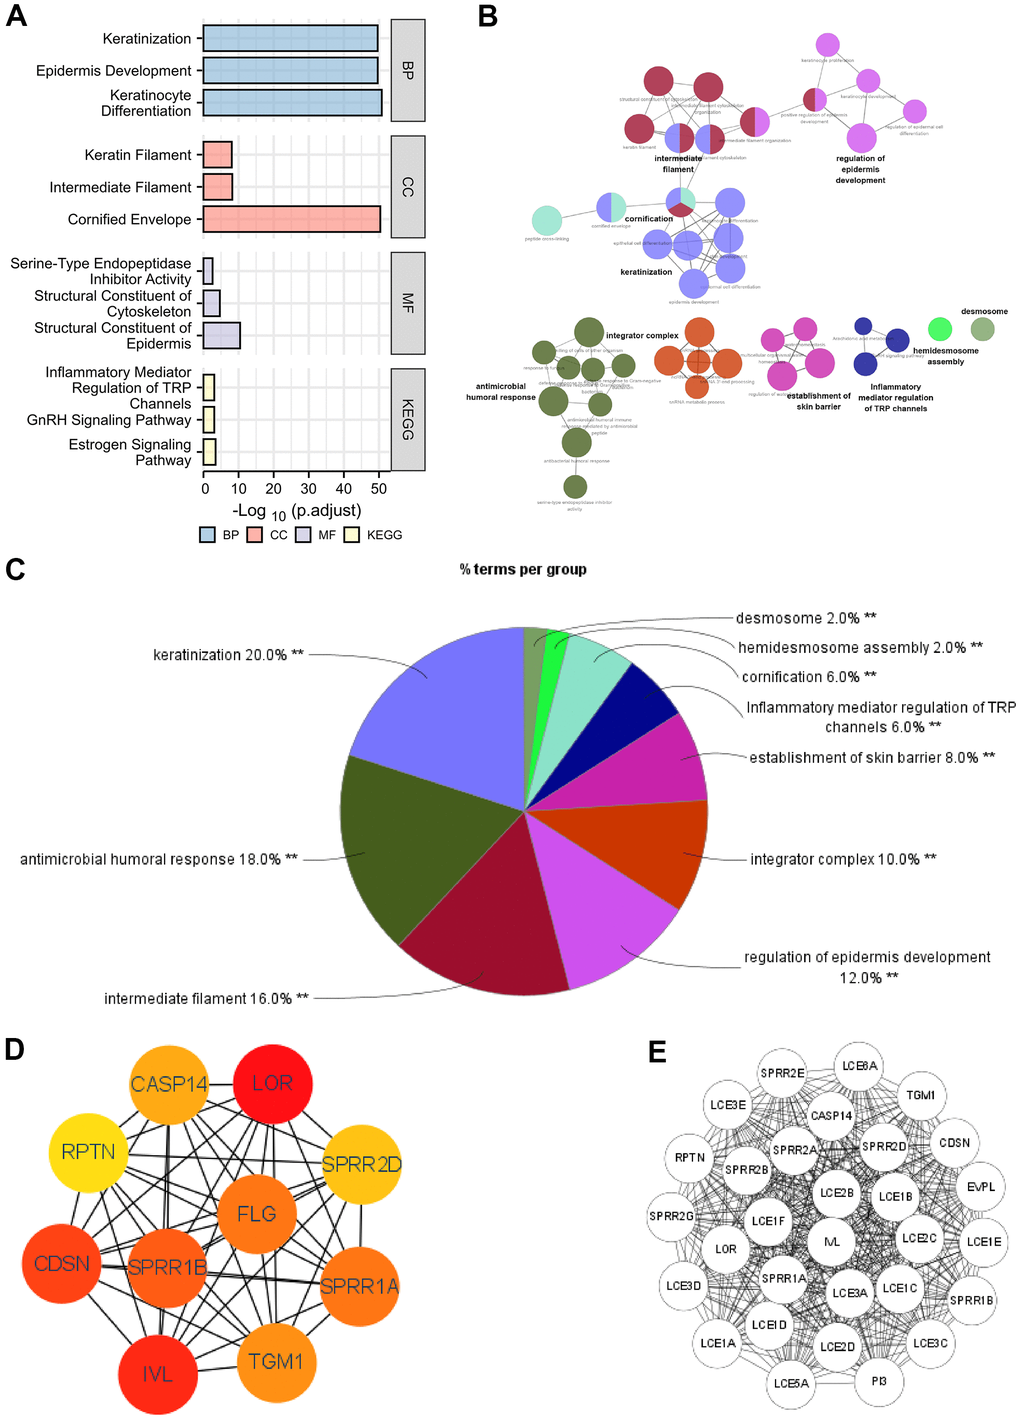 Functional enrichment analysis of DEGs between high and low expression of SERP1 in SKCM patients. (A–C) GO and KEGG pathway enrichment analyses for DEGs between High and -Low expression of SERP1 in SKCM patients. (D) The top 10 hub genes ranked by MCC of cytoHubba, (E) The top 30 hub genes ranked by MCODE.